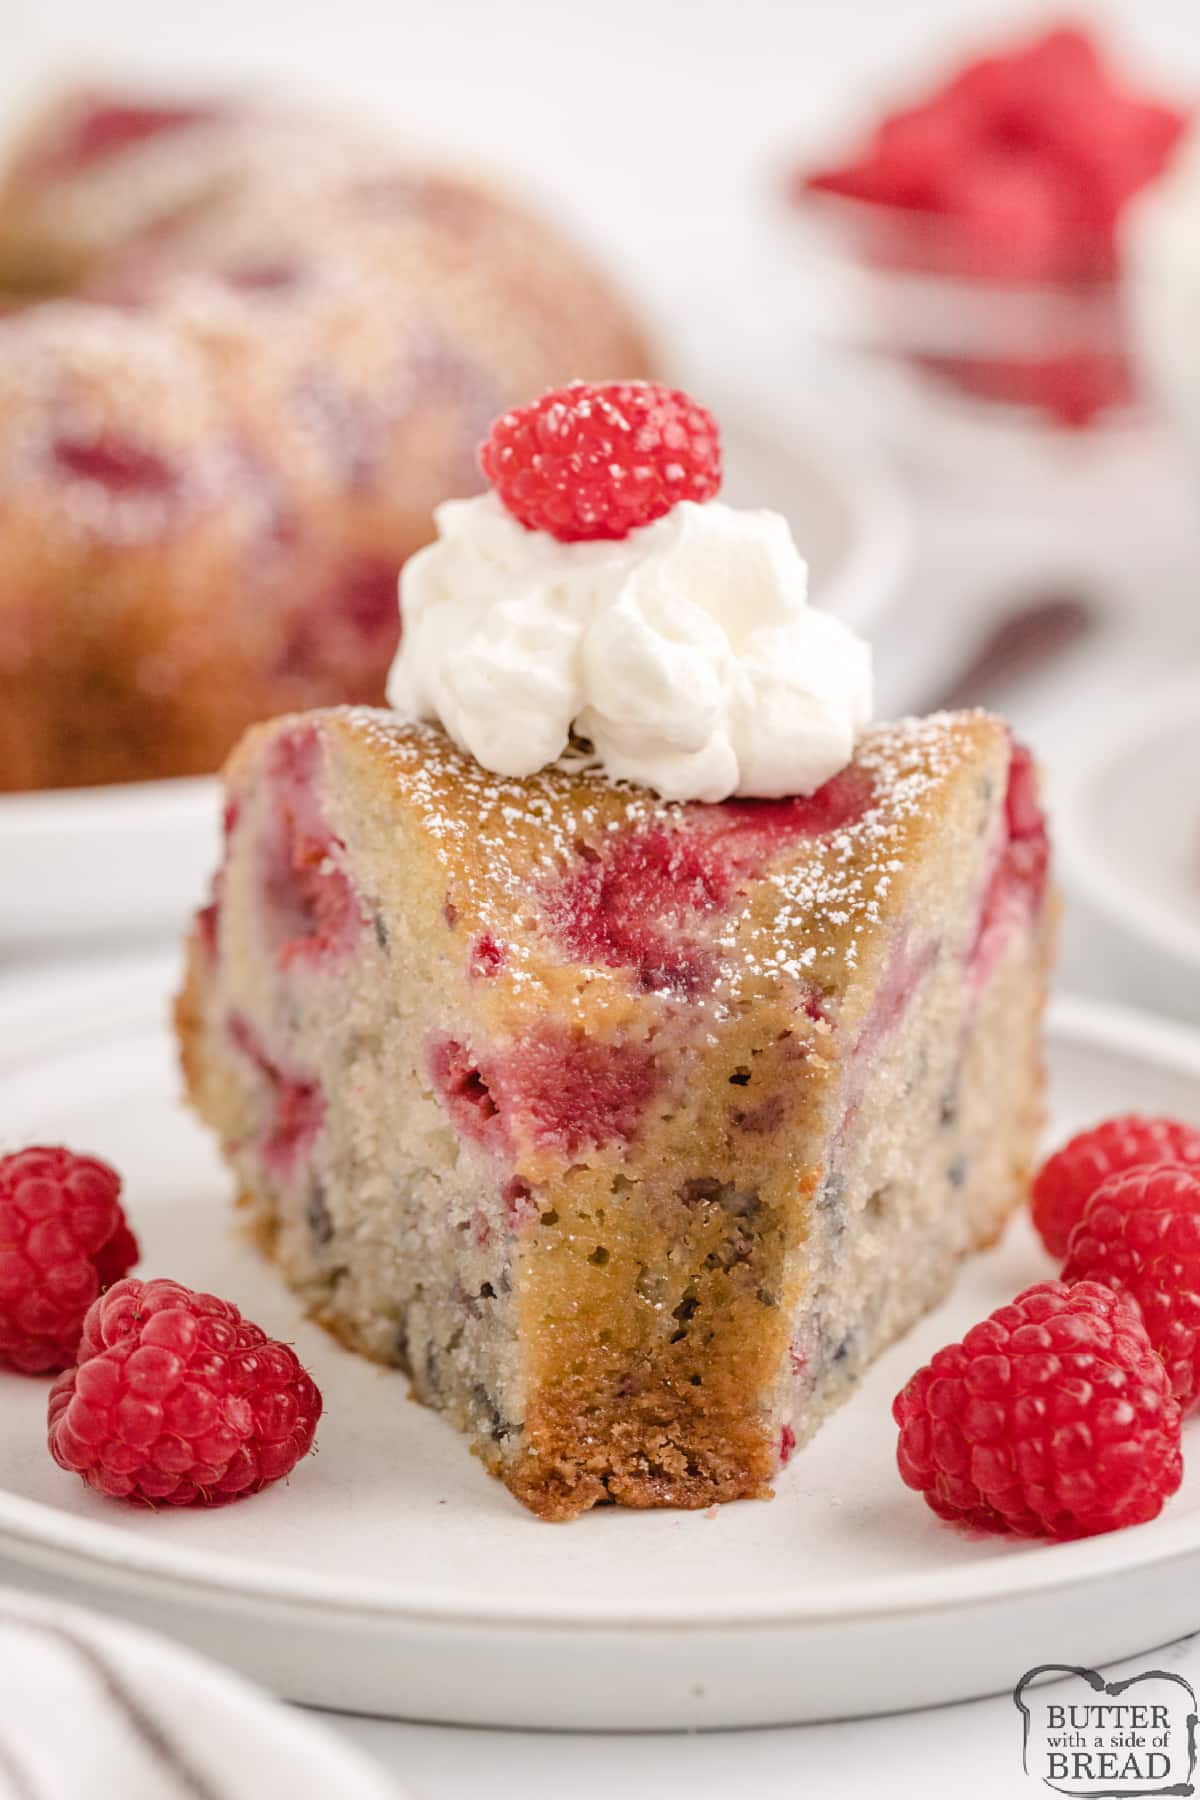 Raspberry Buttermilk Cake is a crowd-pleasing dessert that is easy to make and sure to impress. Made with fresh raspberries and buttermilk, this delicious cake is perfect for dinner parties, potlucks or just for a weeknight dessert. 